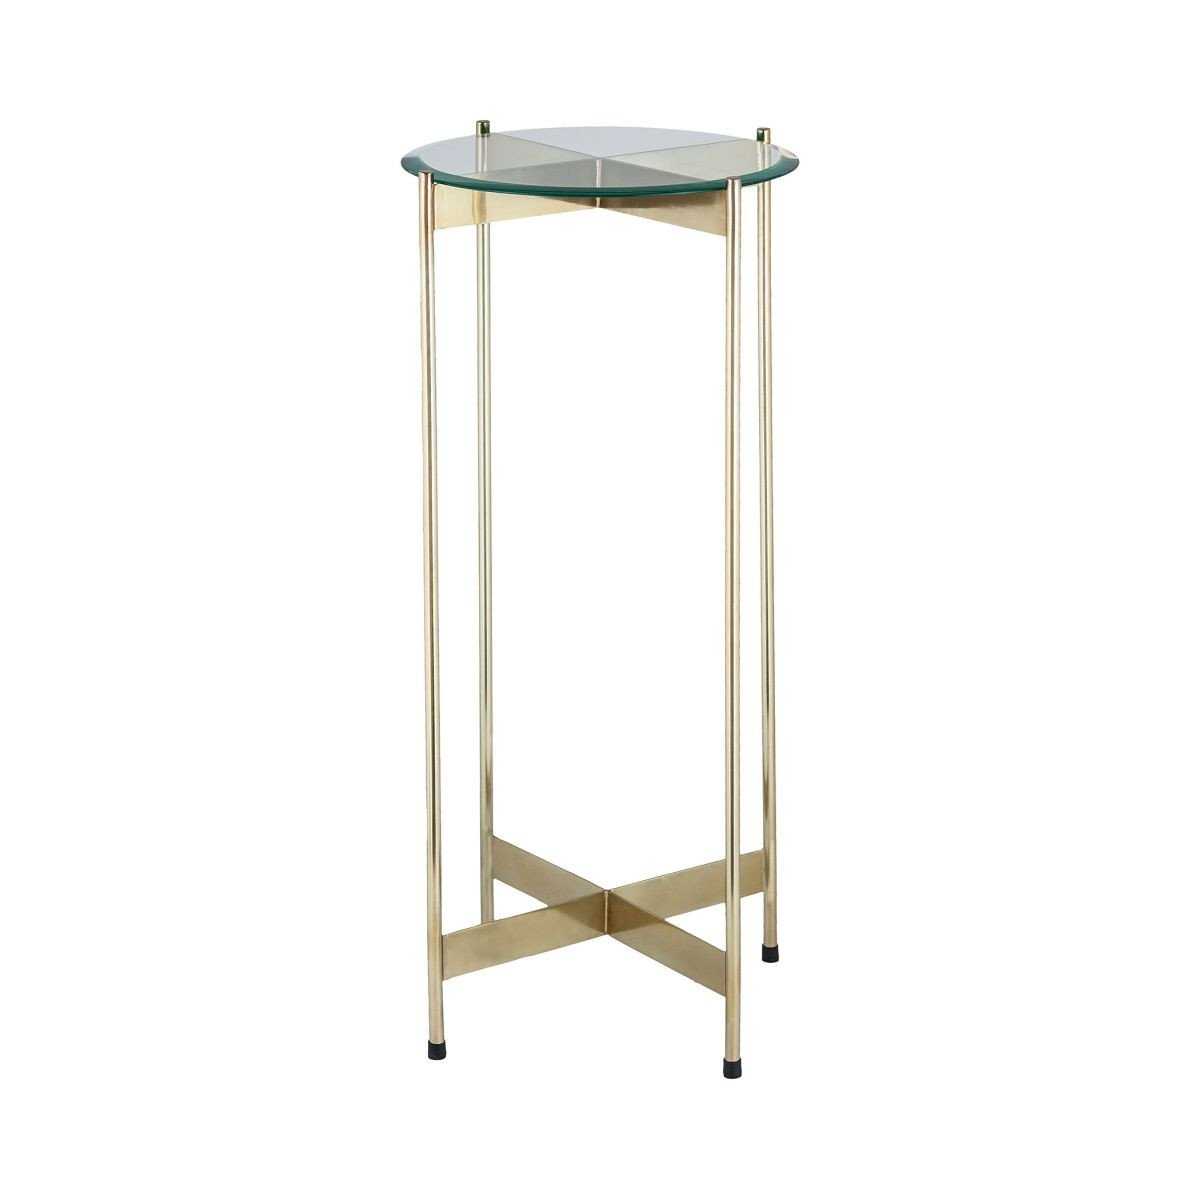 wall street gold accent table design lazy susan burke decor pottery barn black dining room glass side end tables corner lamp patio umbrella lights battery operated desk light